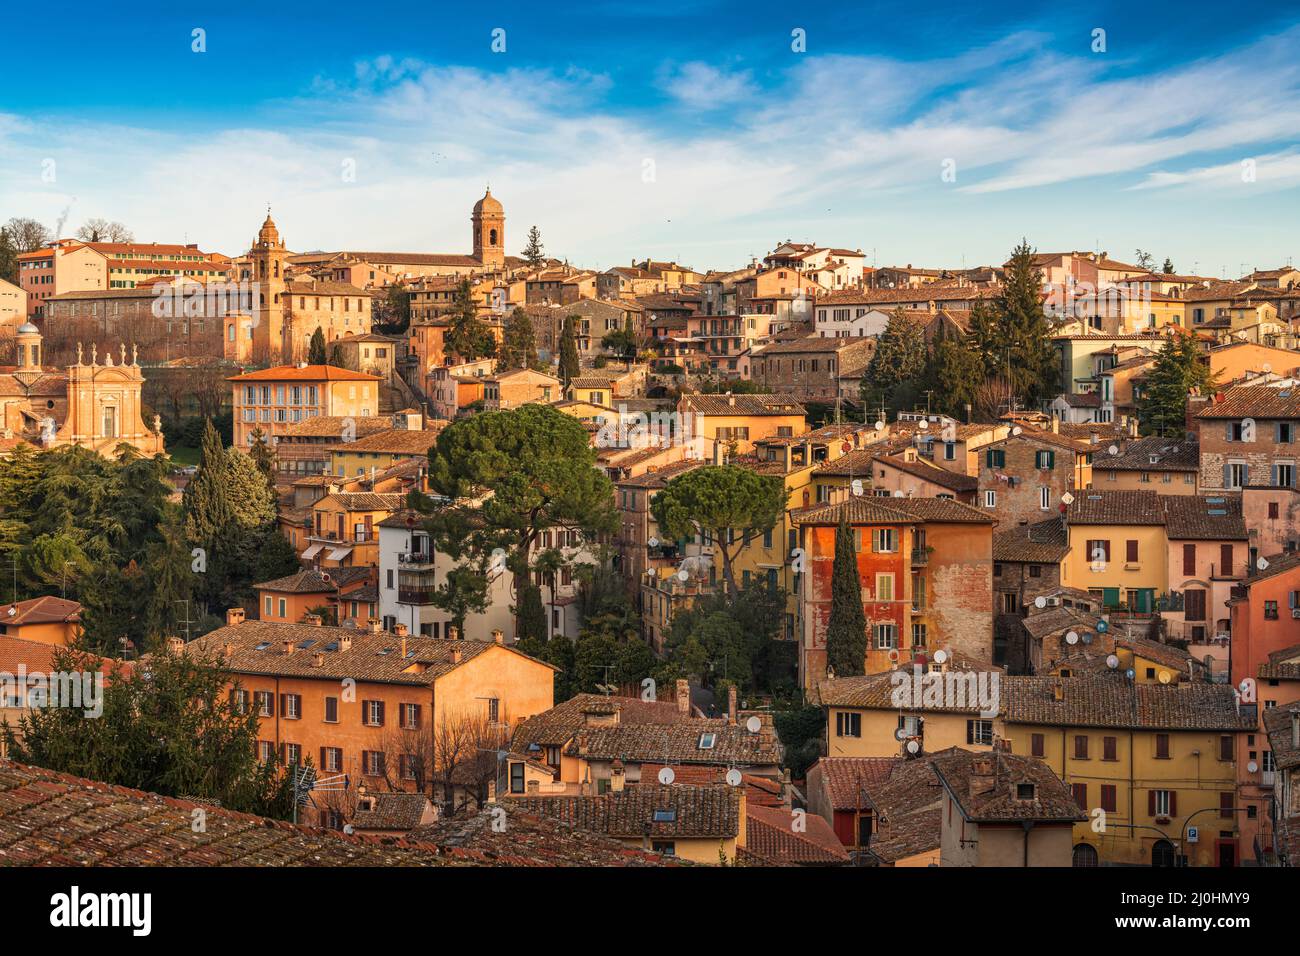 Perugia, Italy old town skyline in the daytime. Stock Photo